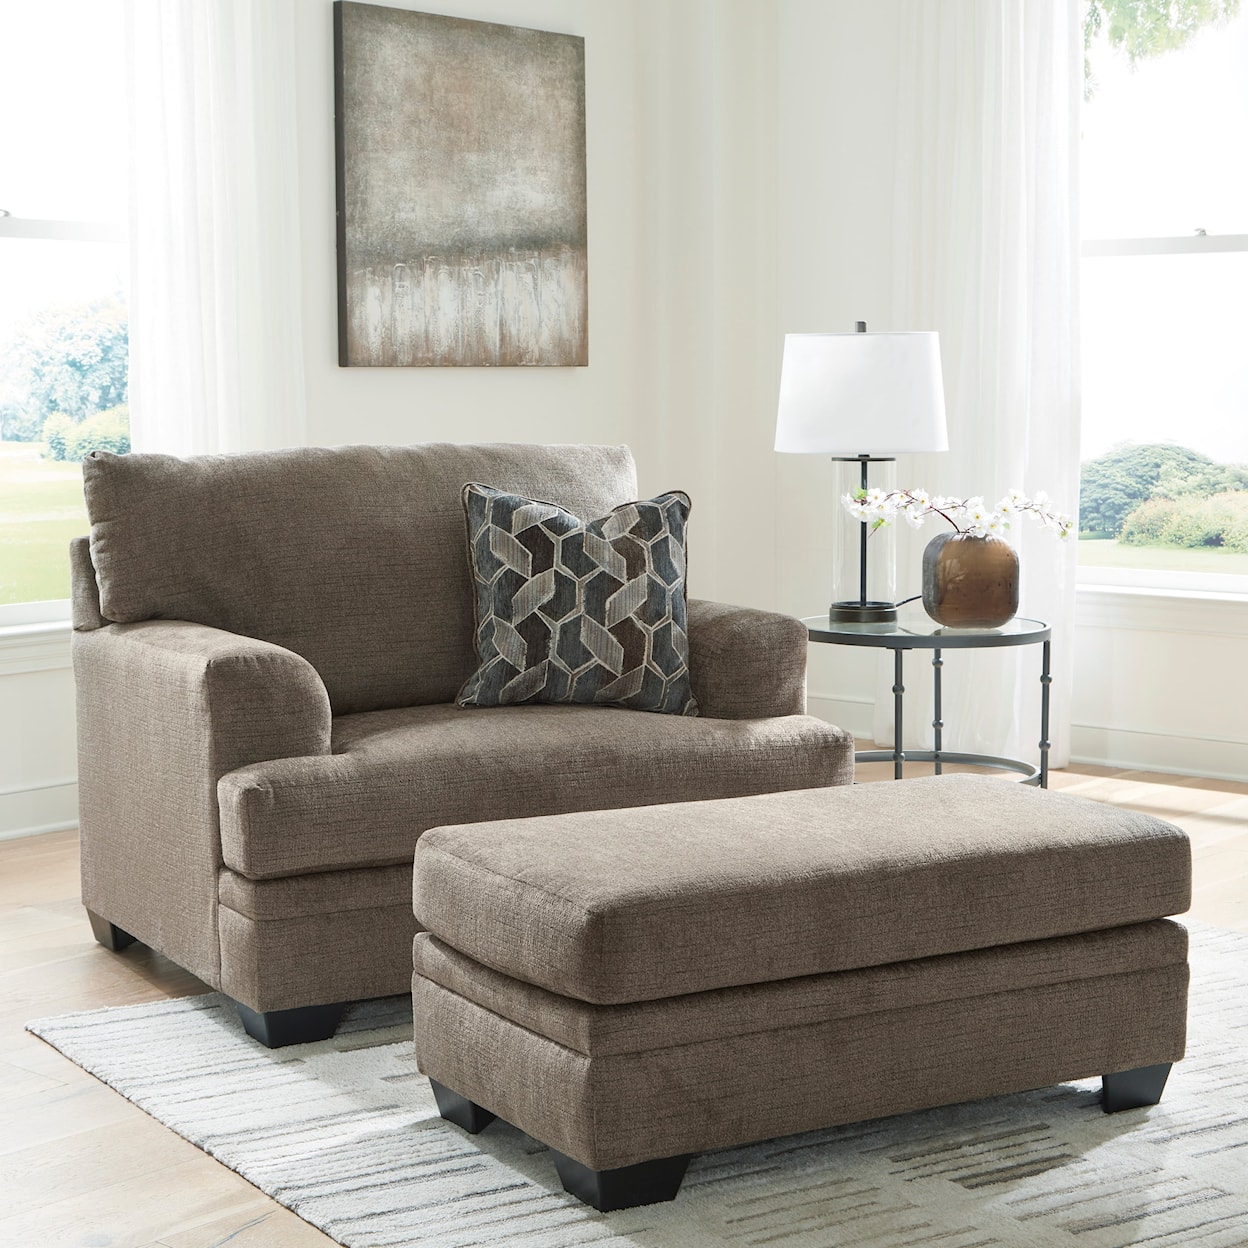 Signature Design by Ashley Furniture Stonemeade Oversized Chair and Ottoman